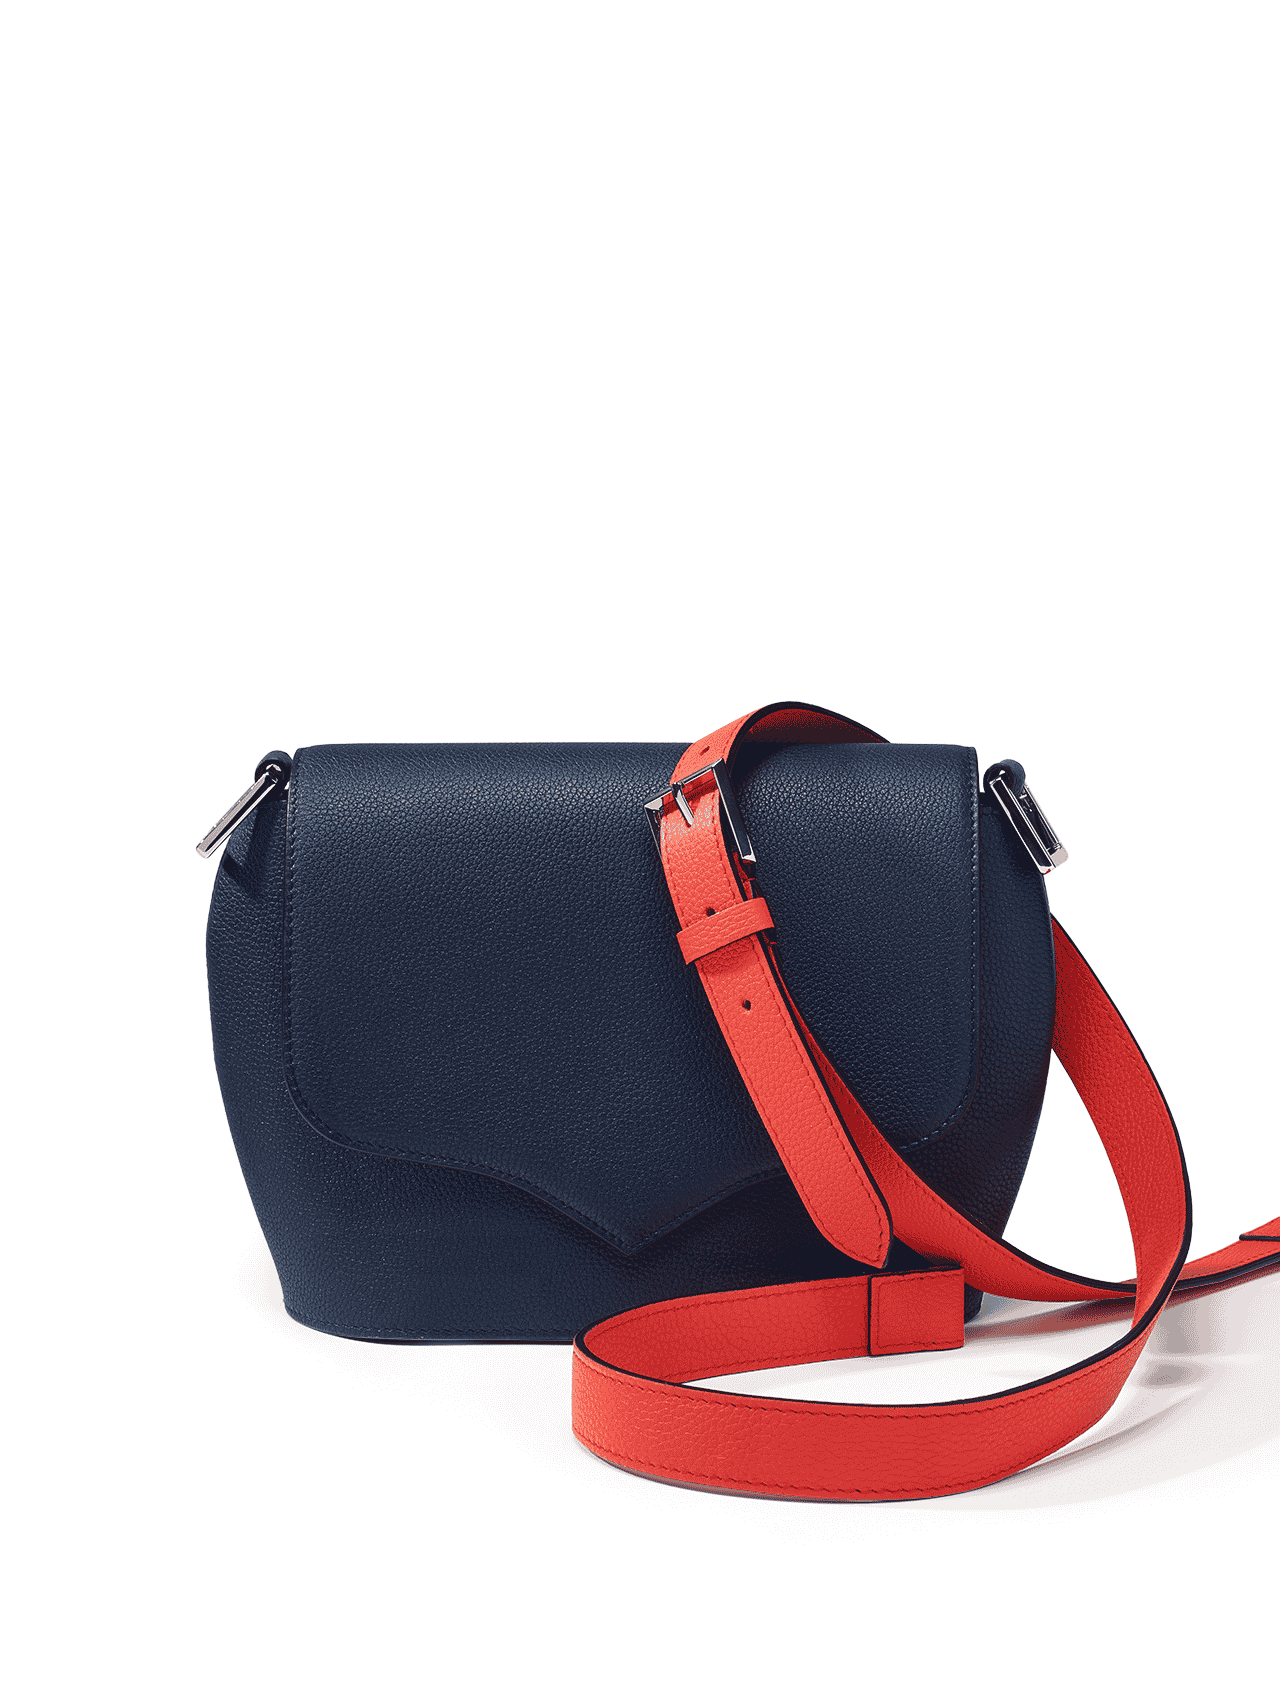 bag leather jean rousseau blue red